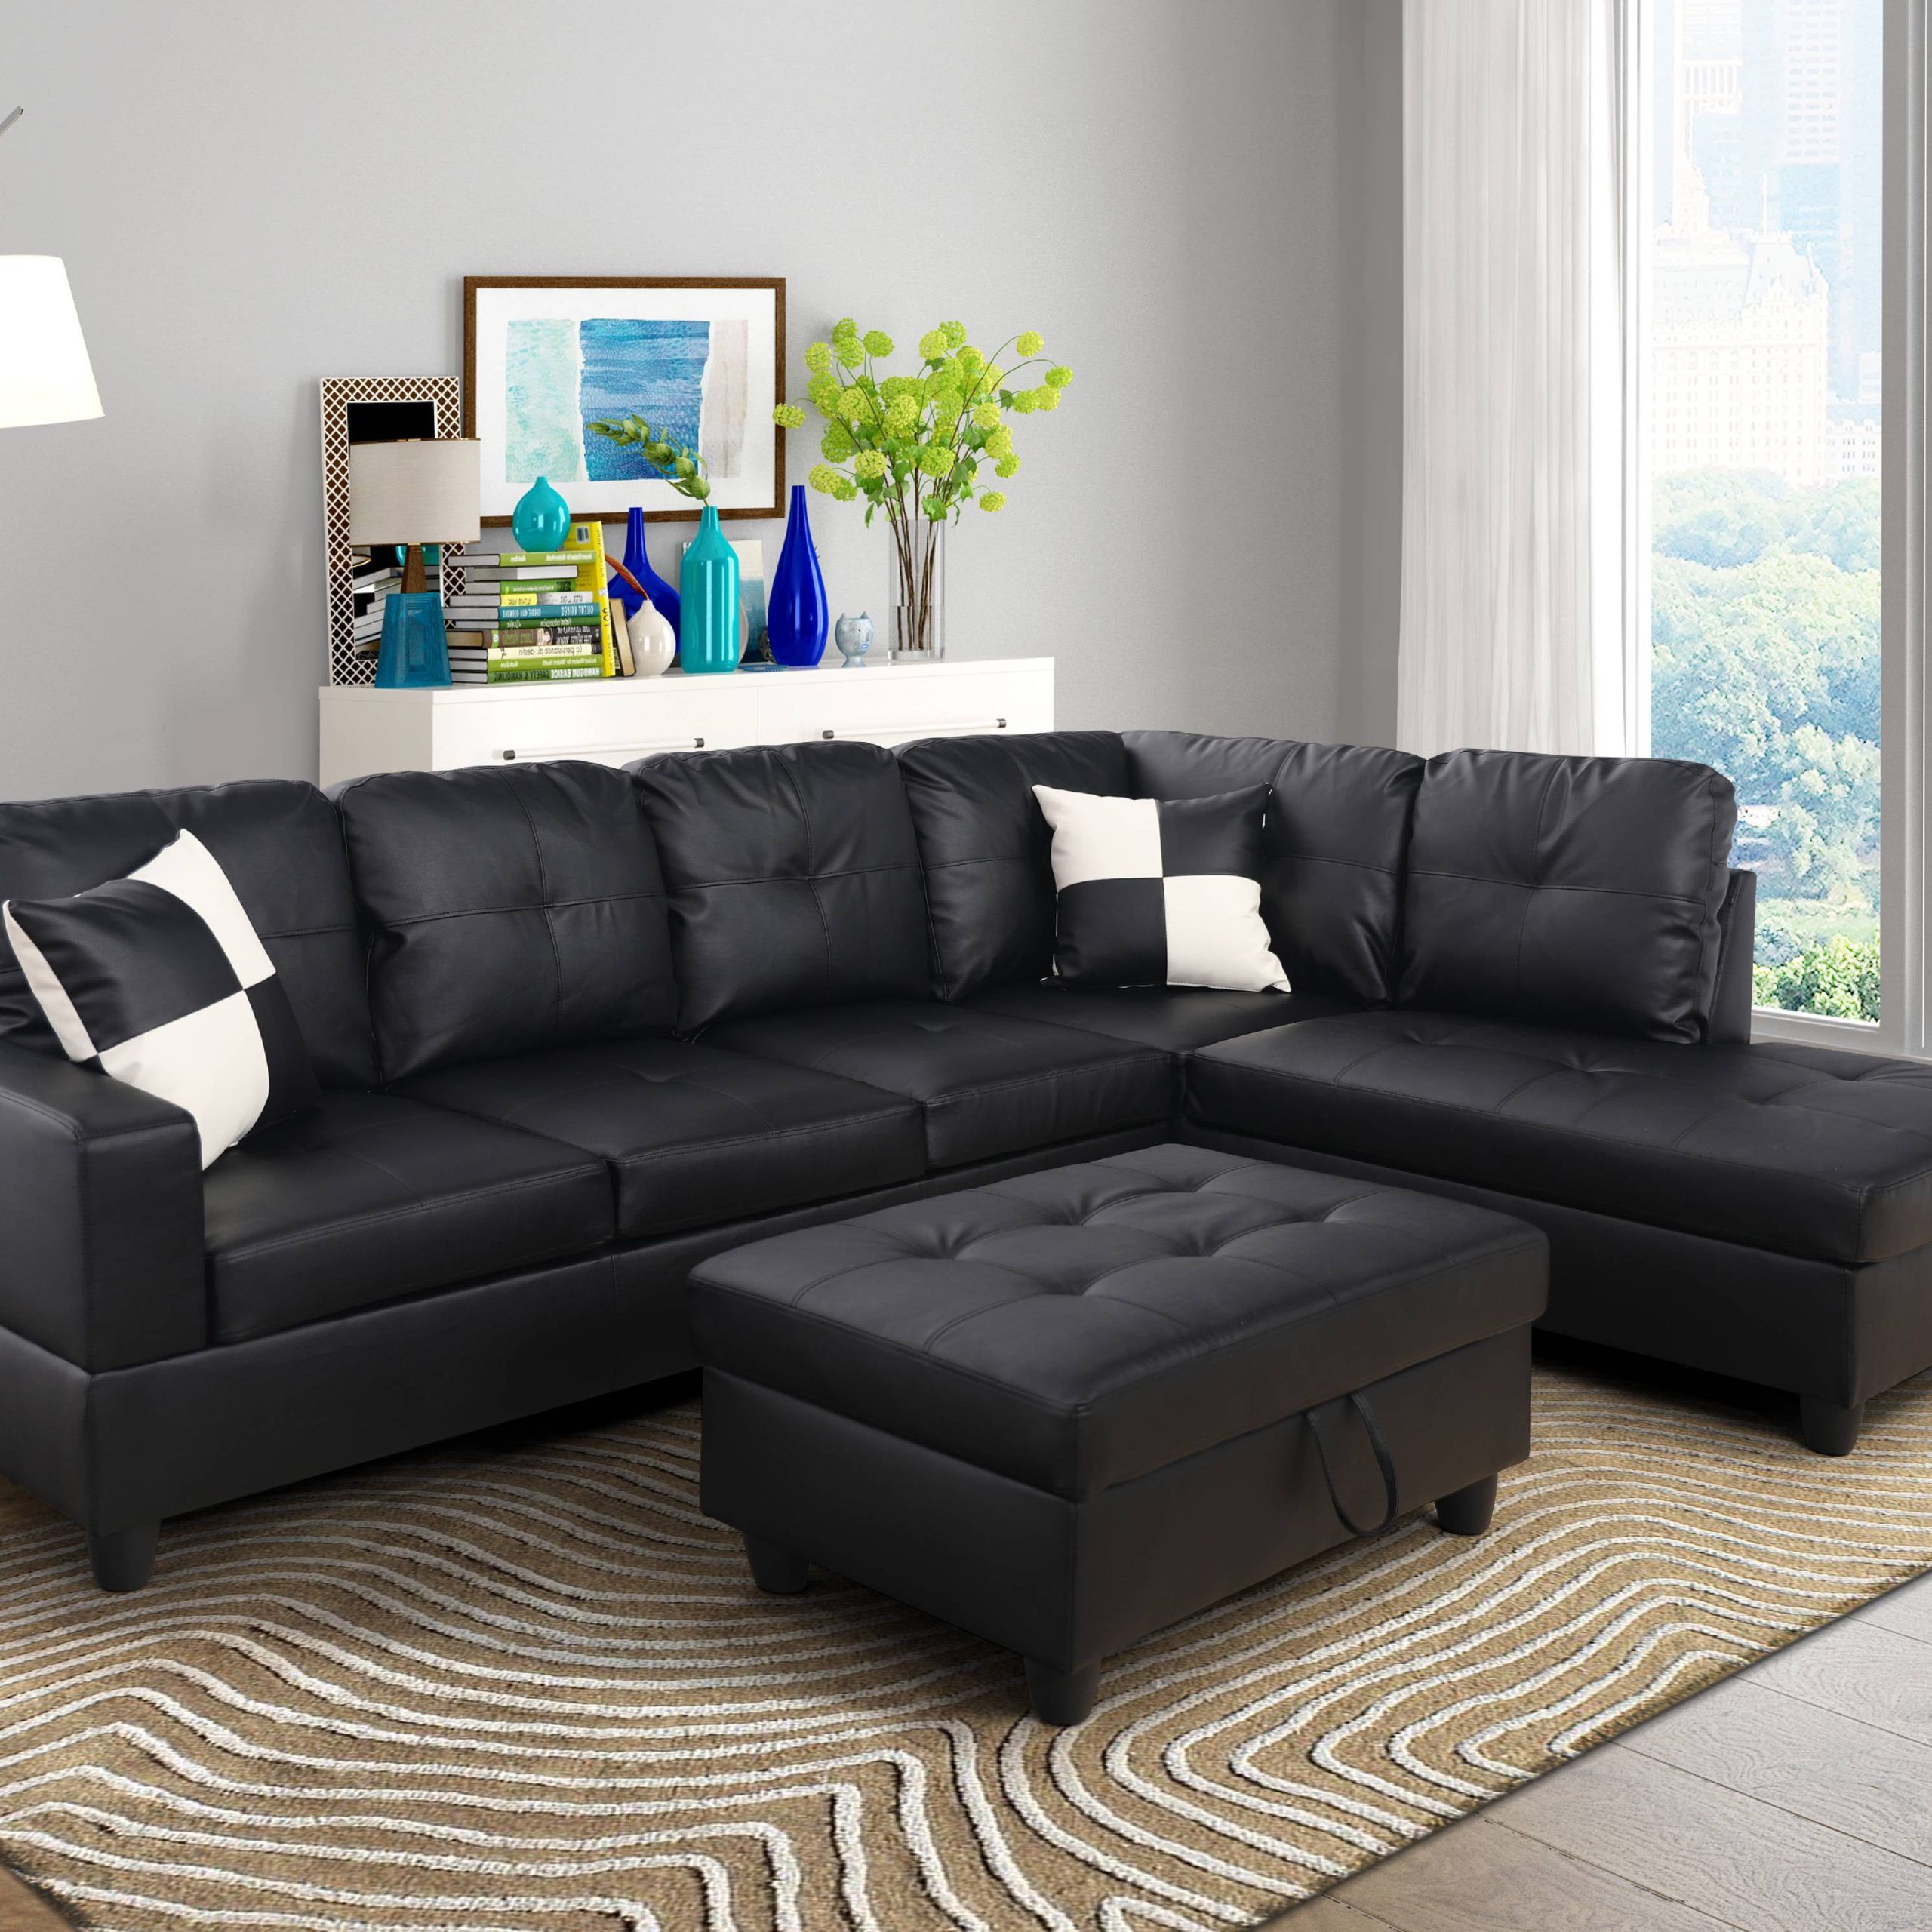 For U Furnishing Classic Black Faux Leather Sectional Sofa, Right Regarding Black Faux Suede Memory Foam Sofas (View 9 of 20)